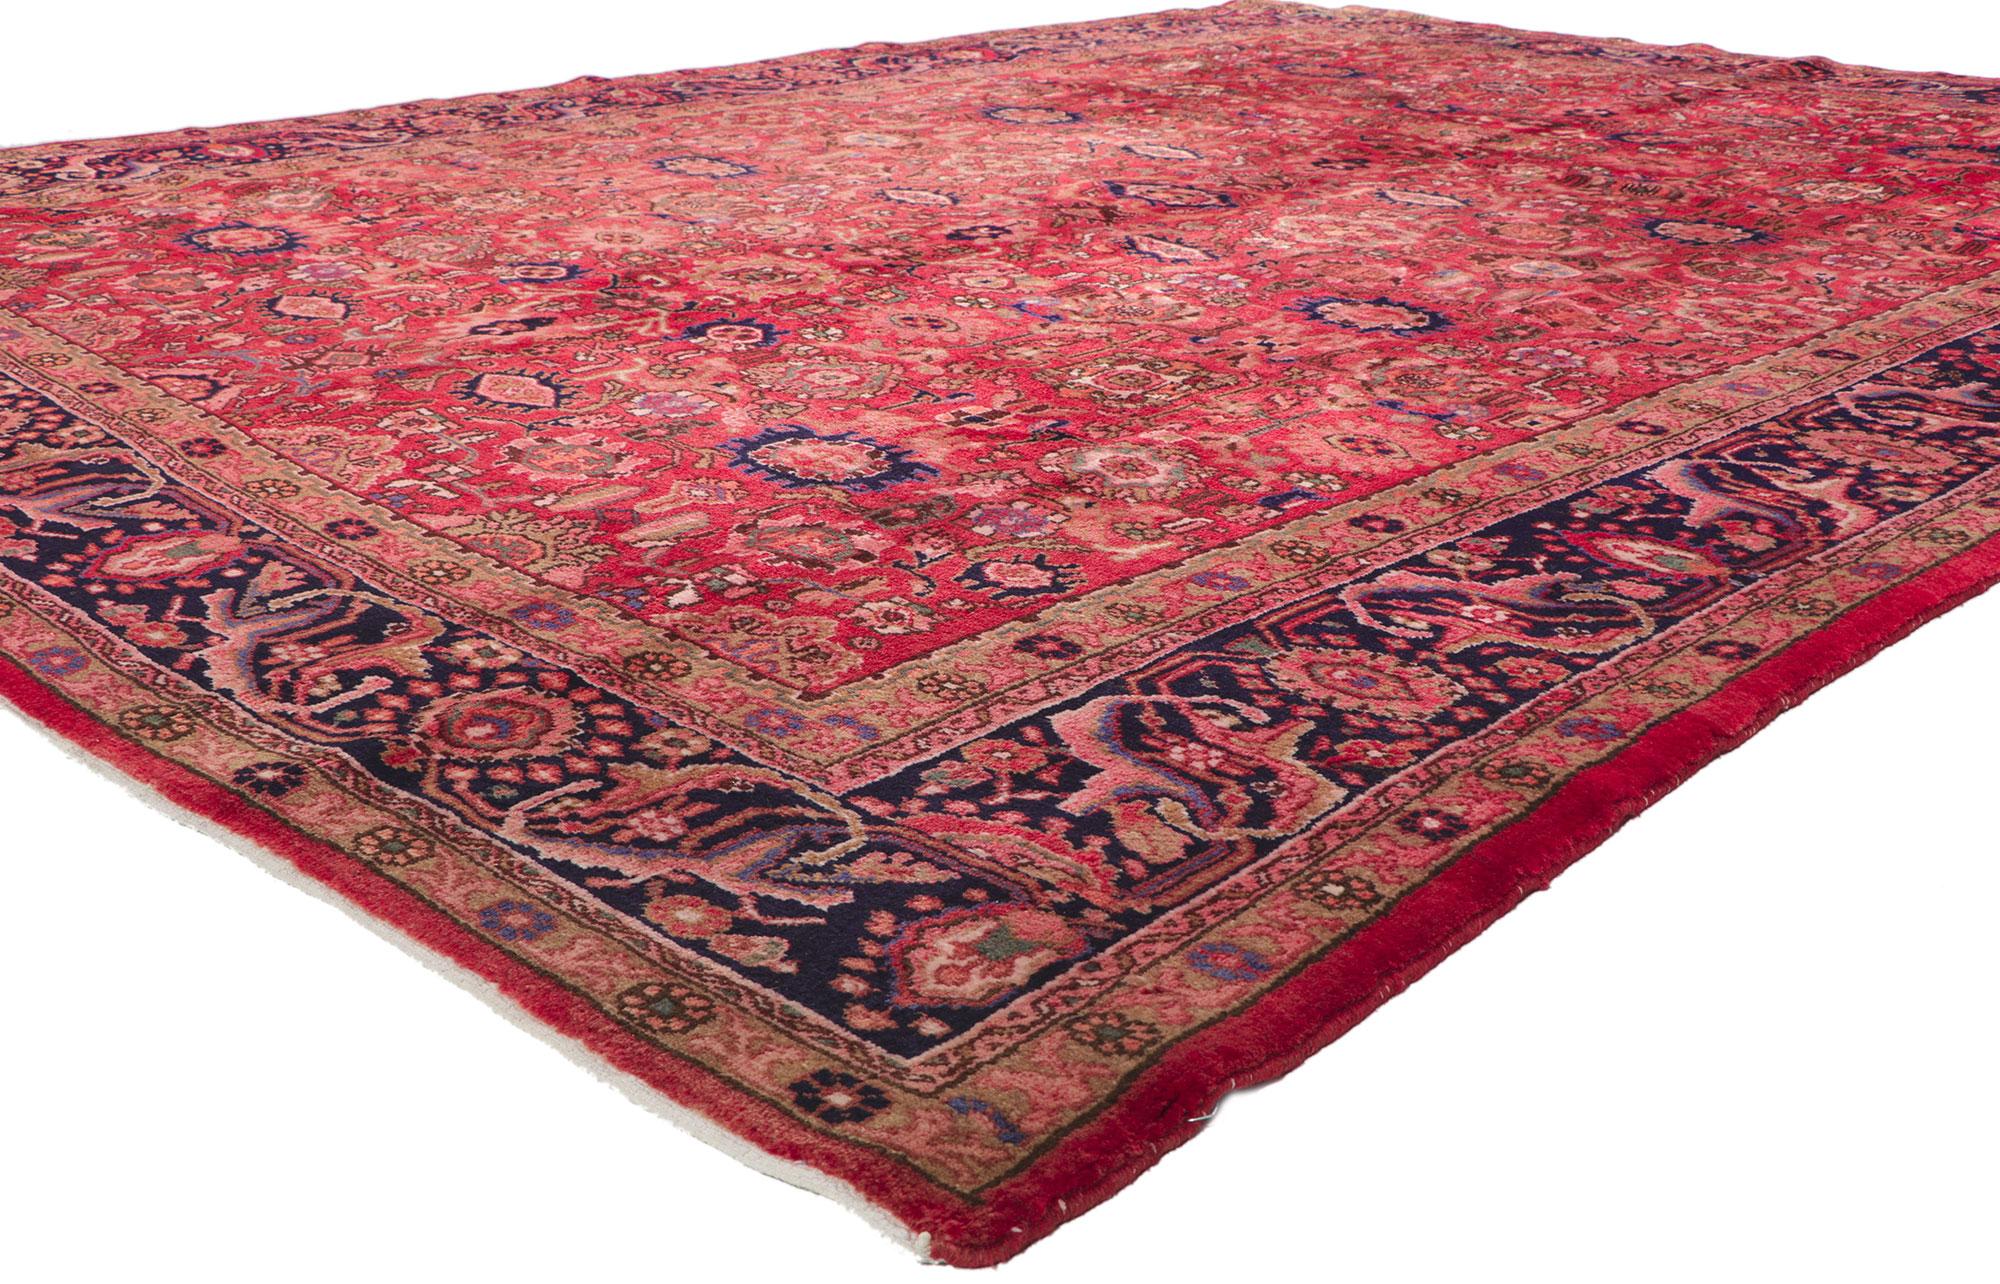 61226 Vintage Persian Malayer rug, 08'08 x 11'07.
Emanating a timeless style with incredible detail and texture, this hand knotted wool vintage Persian Malayer rug is a captivating vision of woven beauty. The sophisticated allover design and